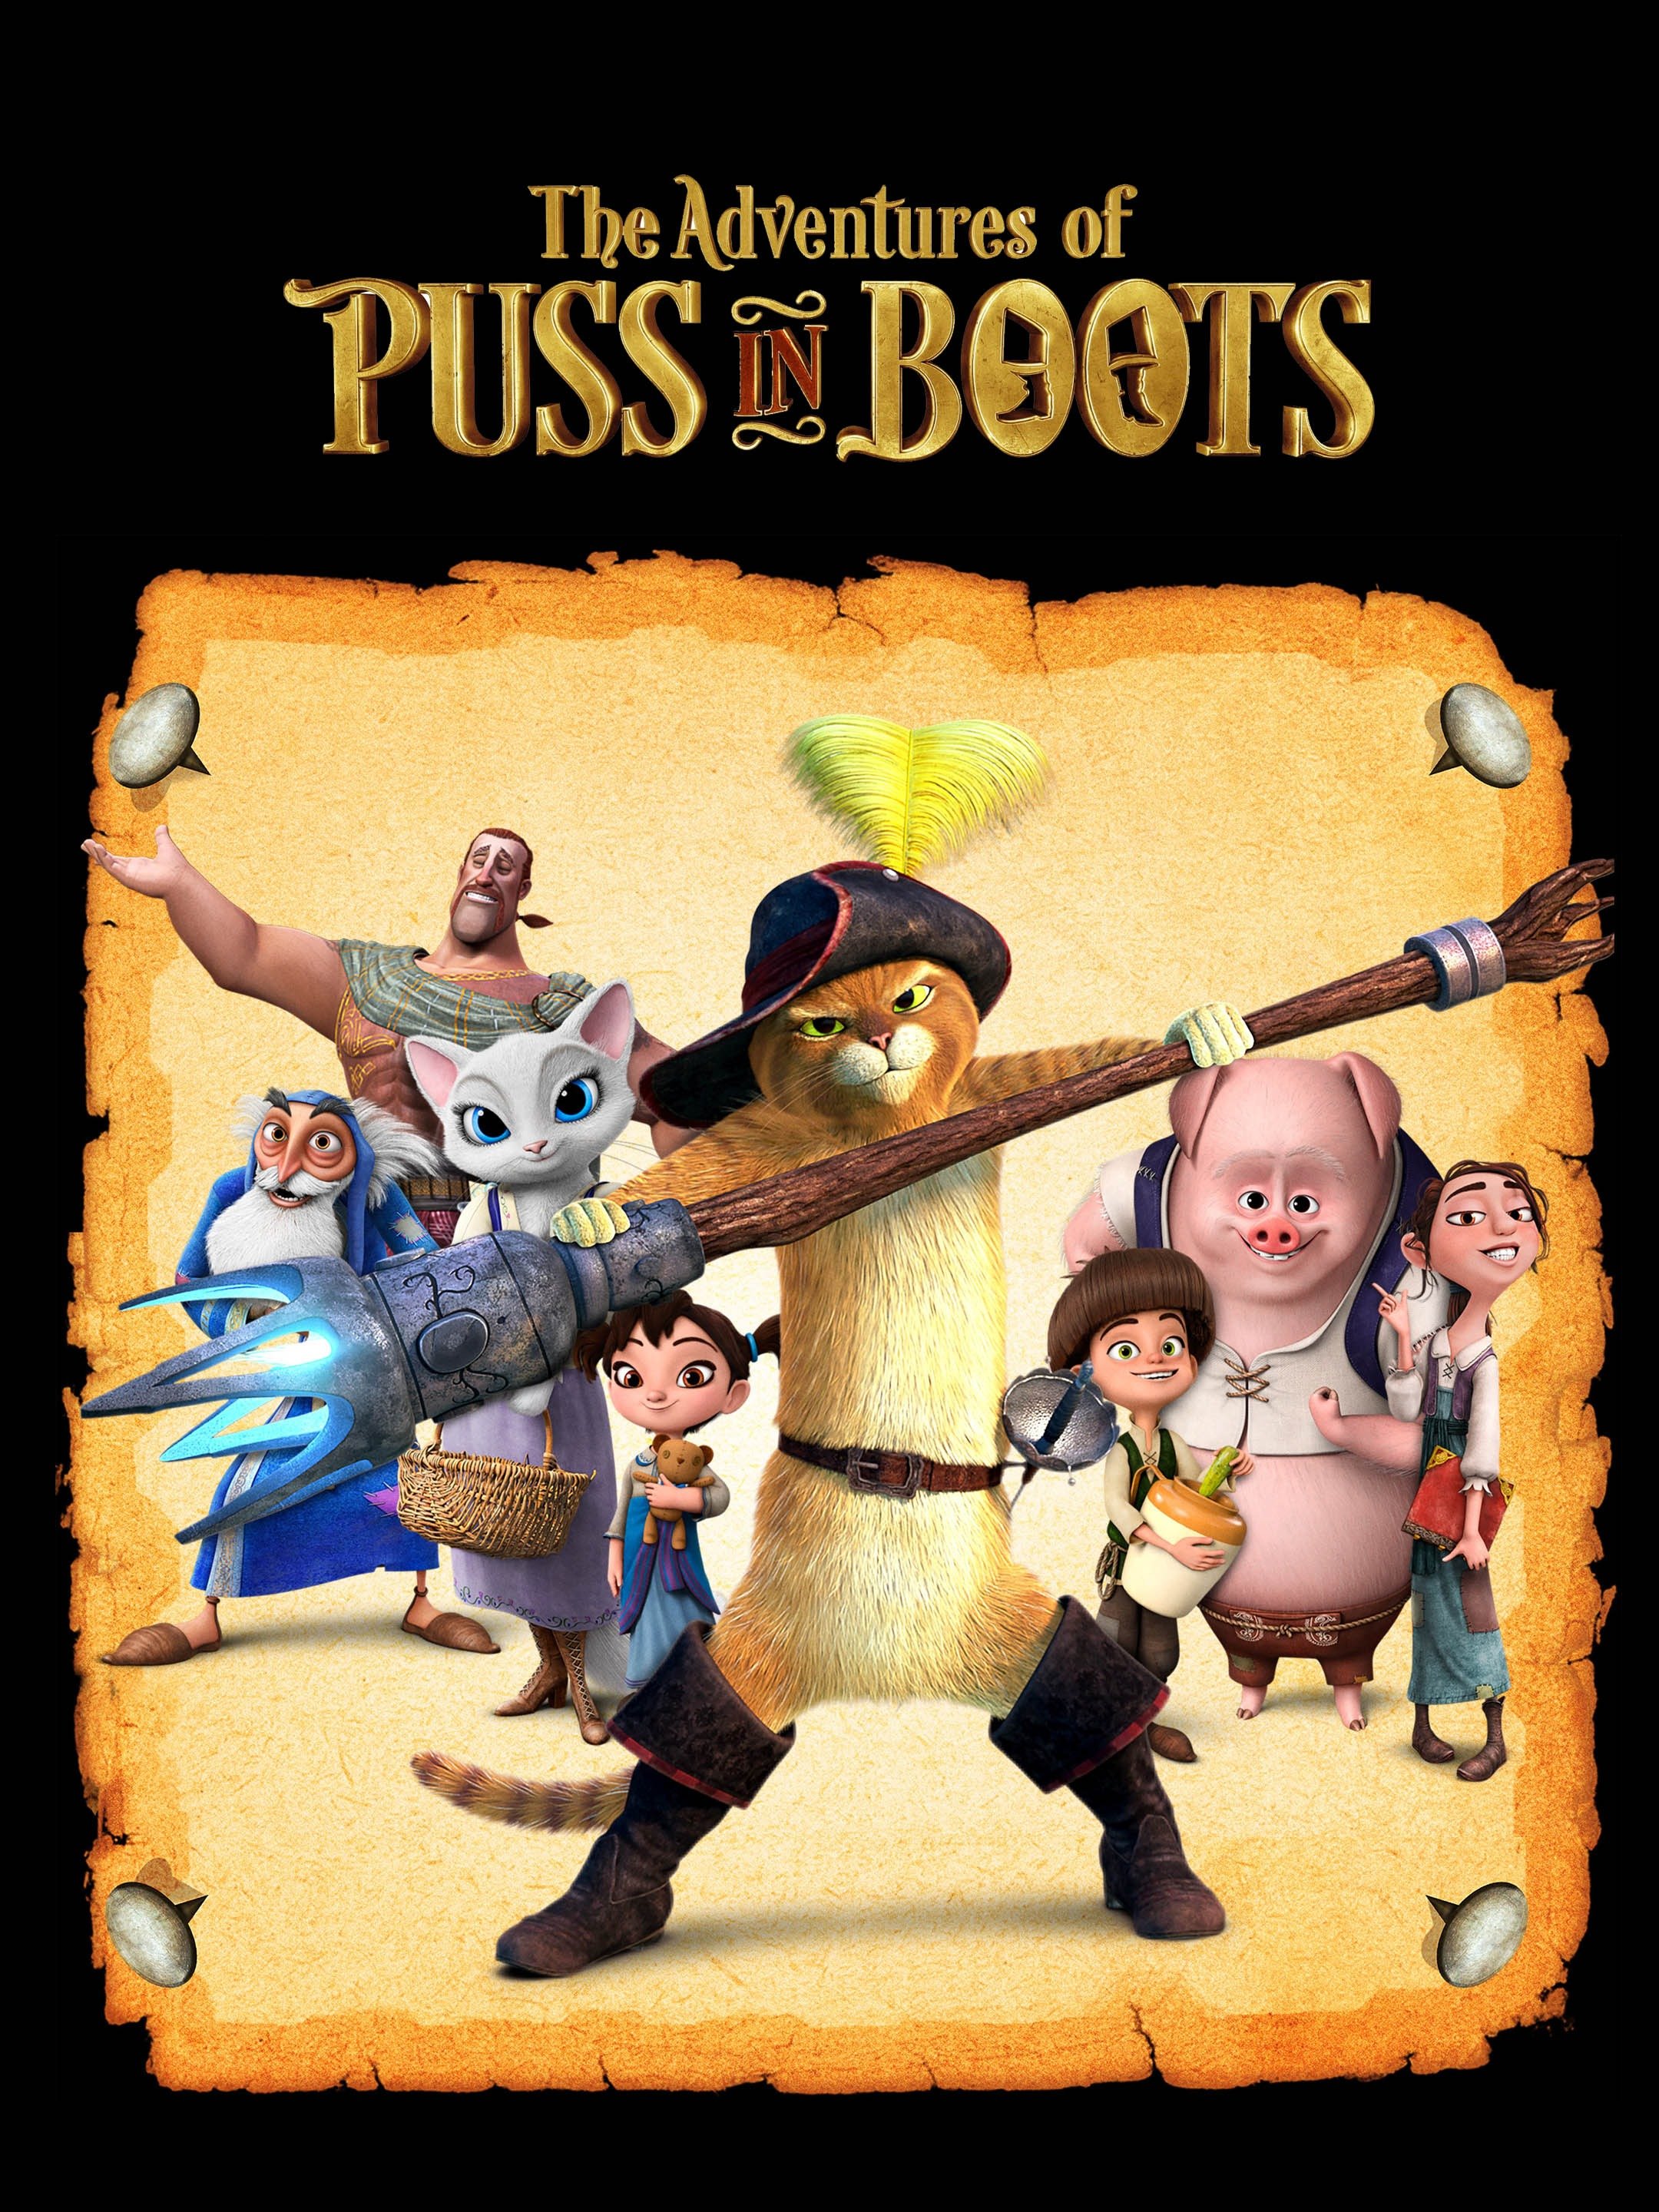 The Adventures of Puss in Boots Rotten Tomatoes